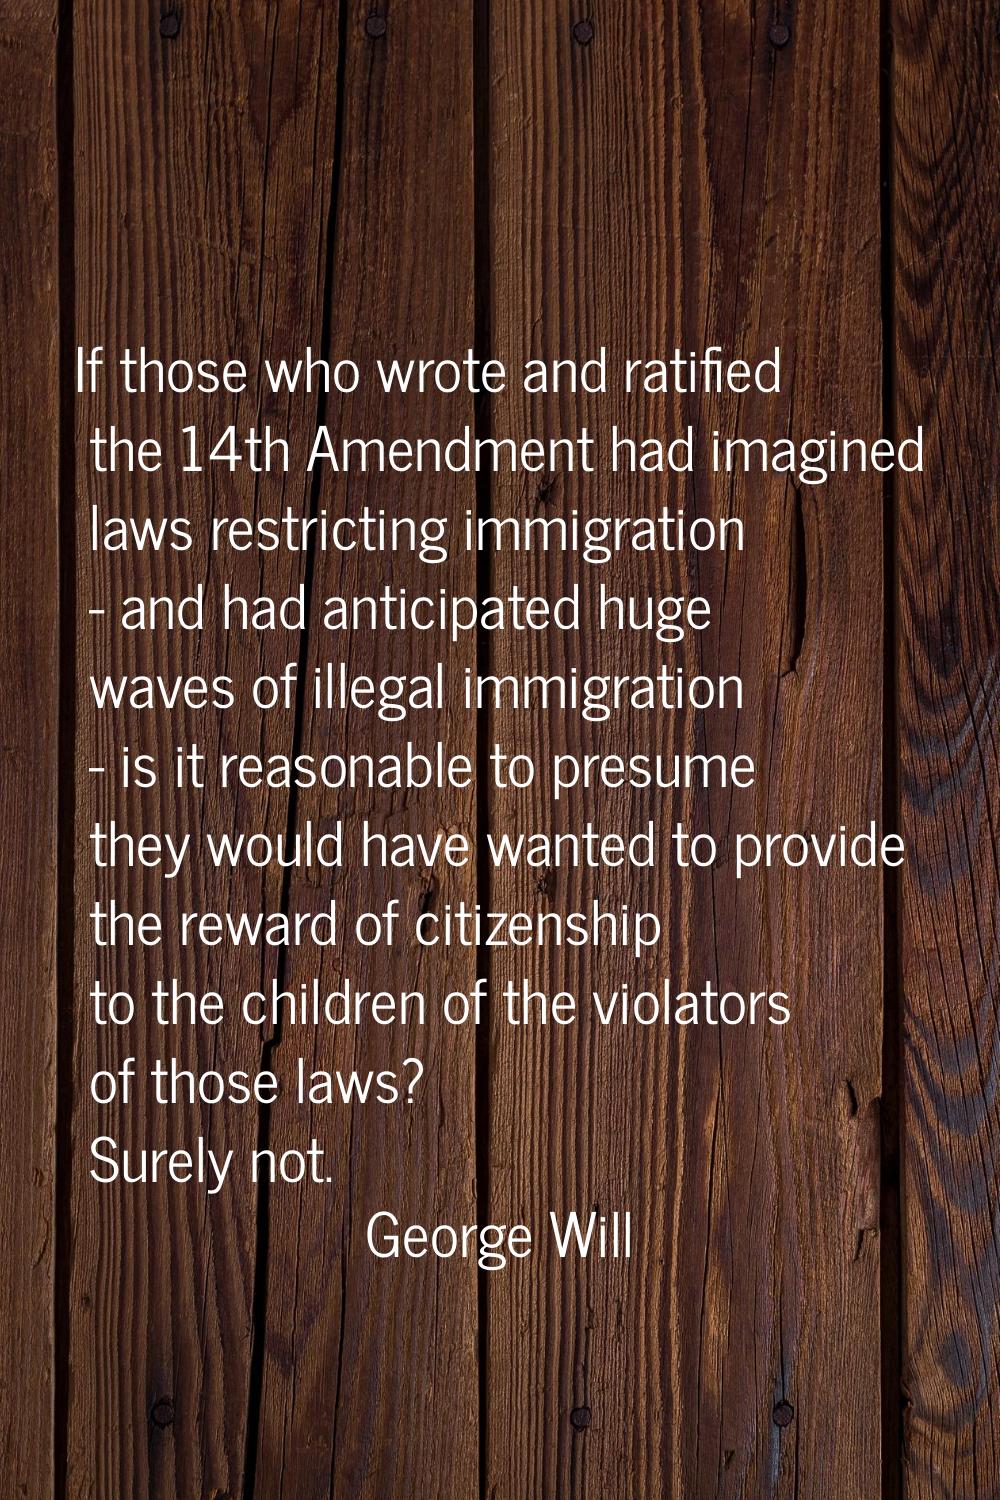 If those who wrote and ratified the 14th Amendment had imagined laws restricting immigration - and 